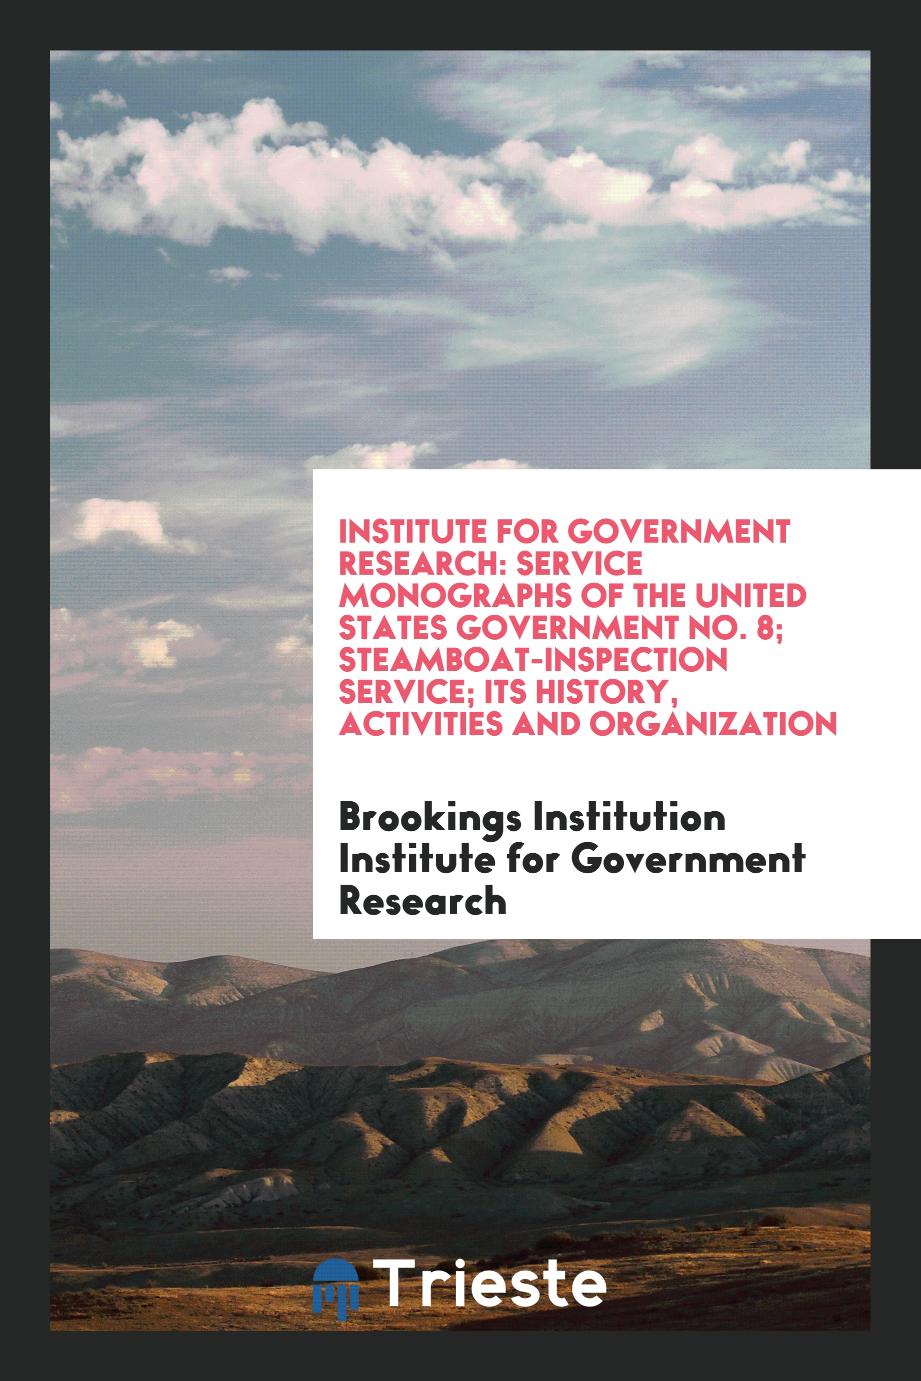 Institute for Government Research: Service Monographs of the United States Government No. 8; Steamboat-Inspection Service; Its History, Activities and Organization